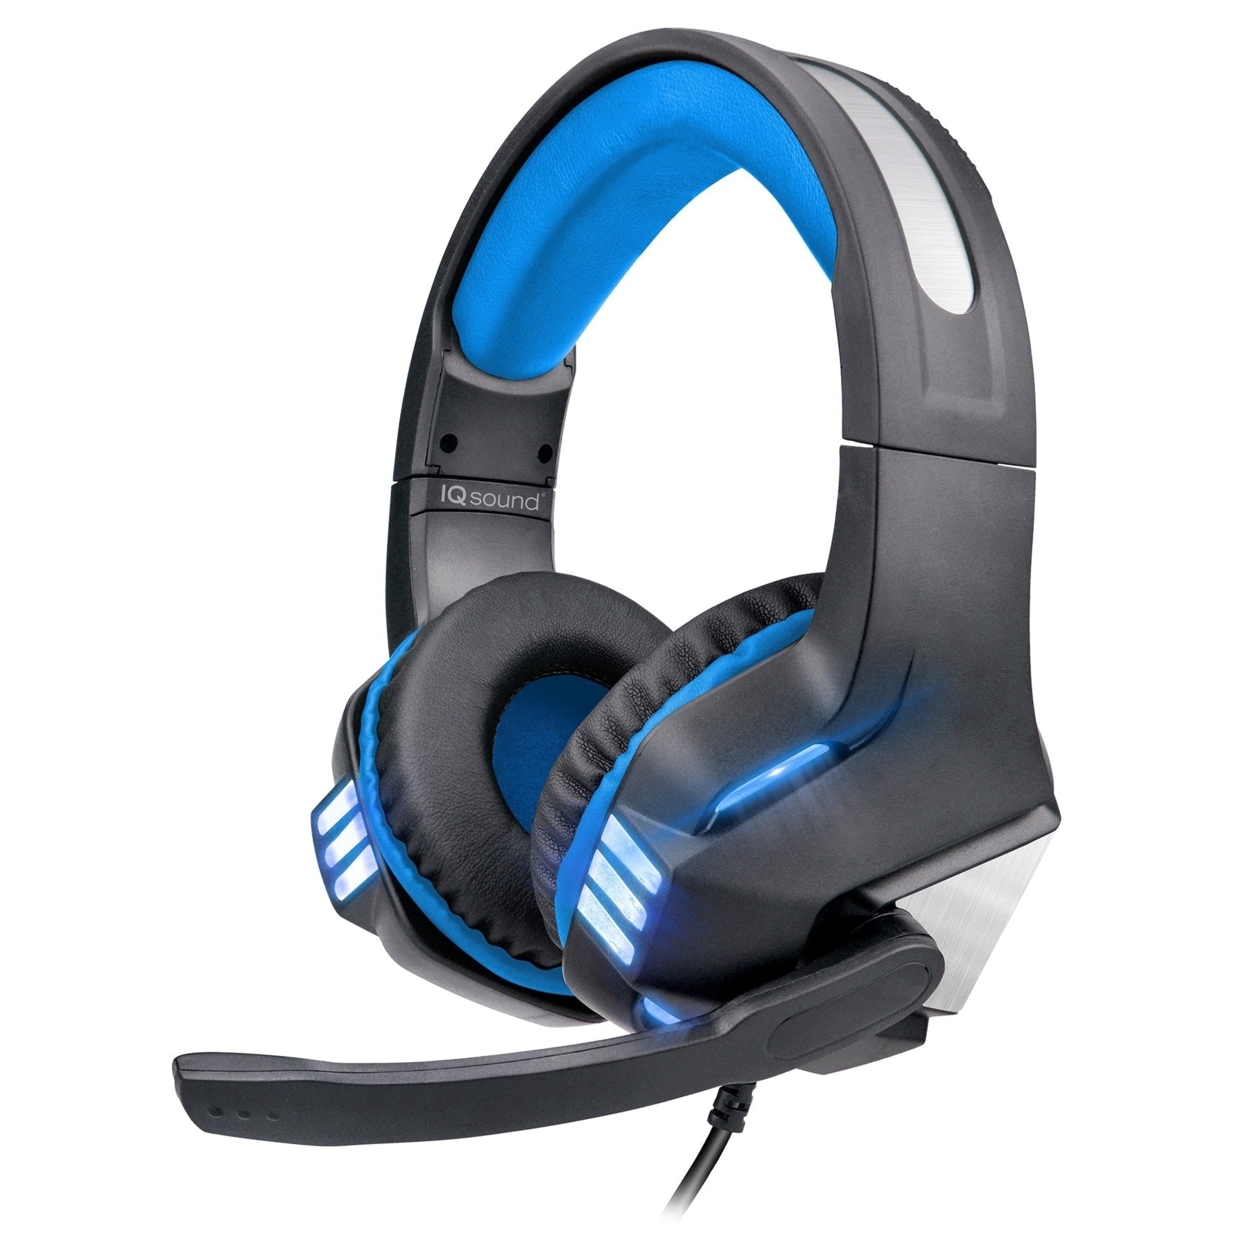 Pro-Wired Gaming Headset With Great Stereo Surround Sound Effect (IQ-480G) - Blue